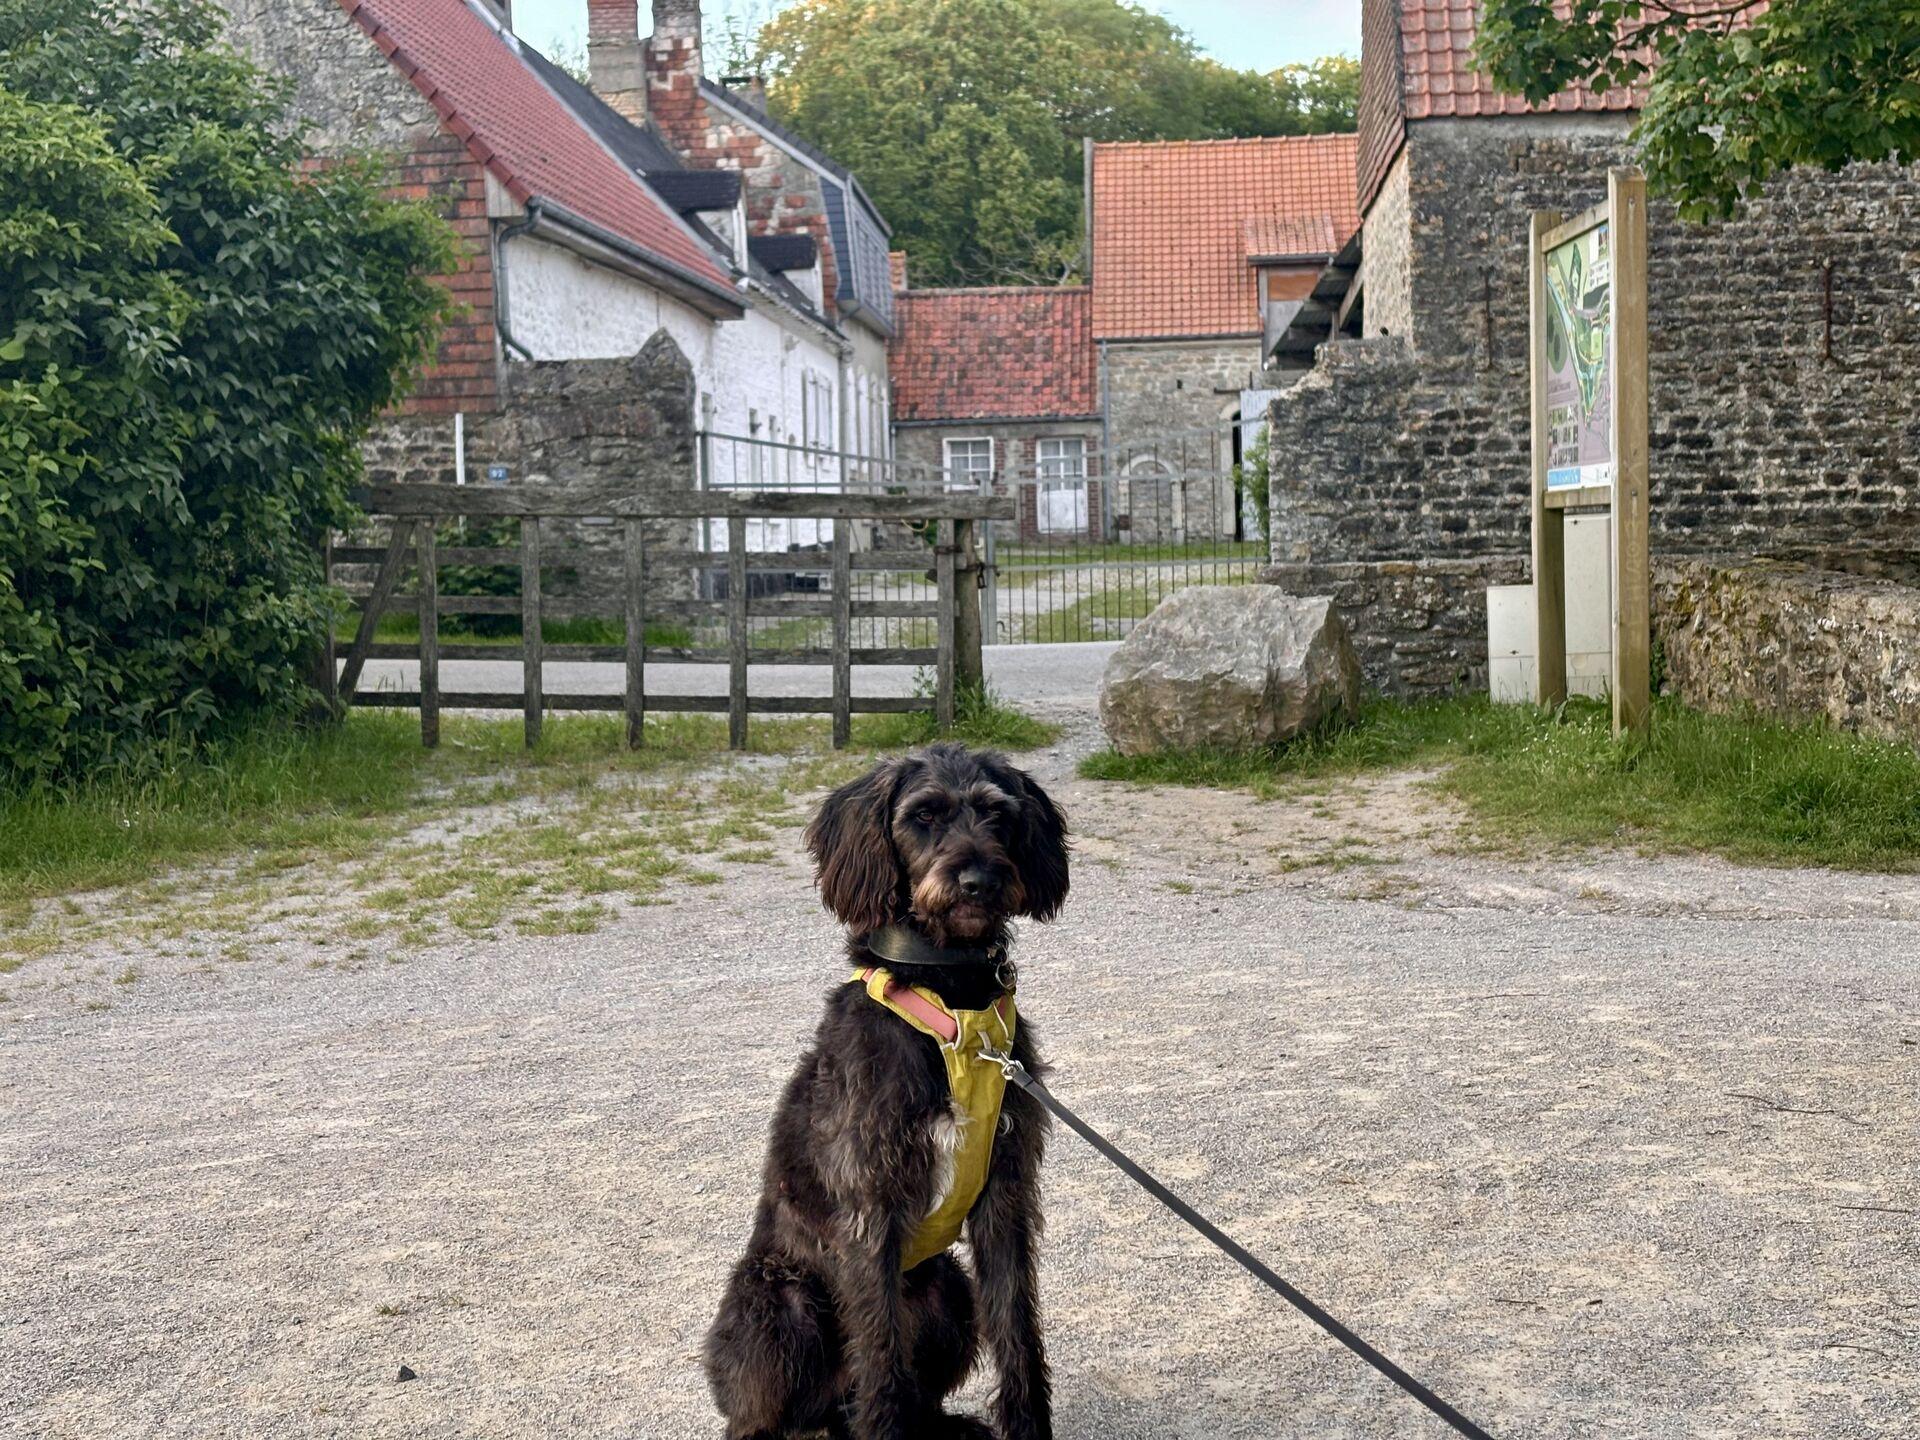 Ghyll in front of an old stone farmhouse in Wimille